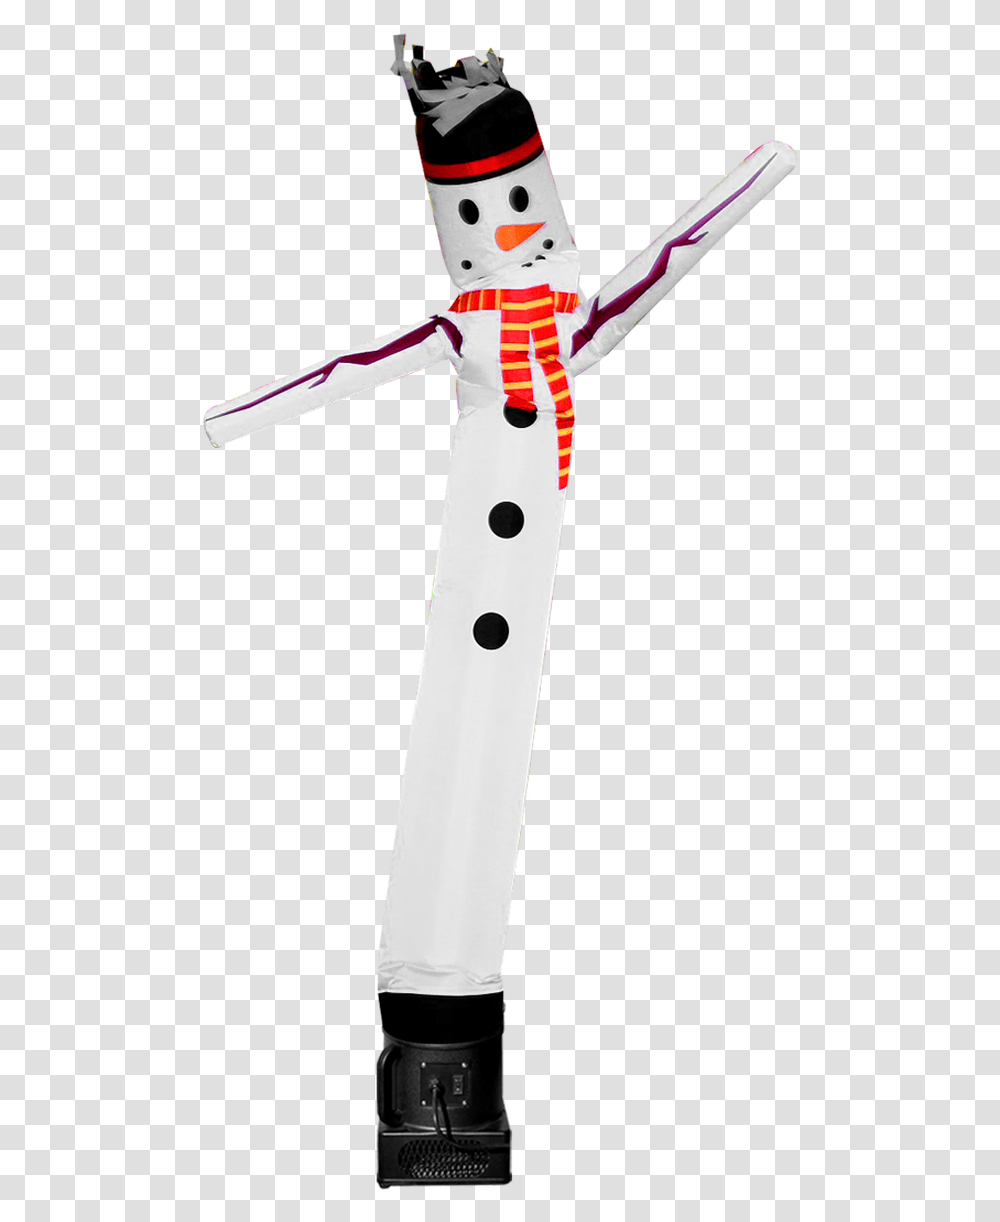 Snowman Design 6ft Air Dancers Inflatable Tube Man Doll, Tool, Axe, Tie, Accessories Transparent Png